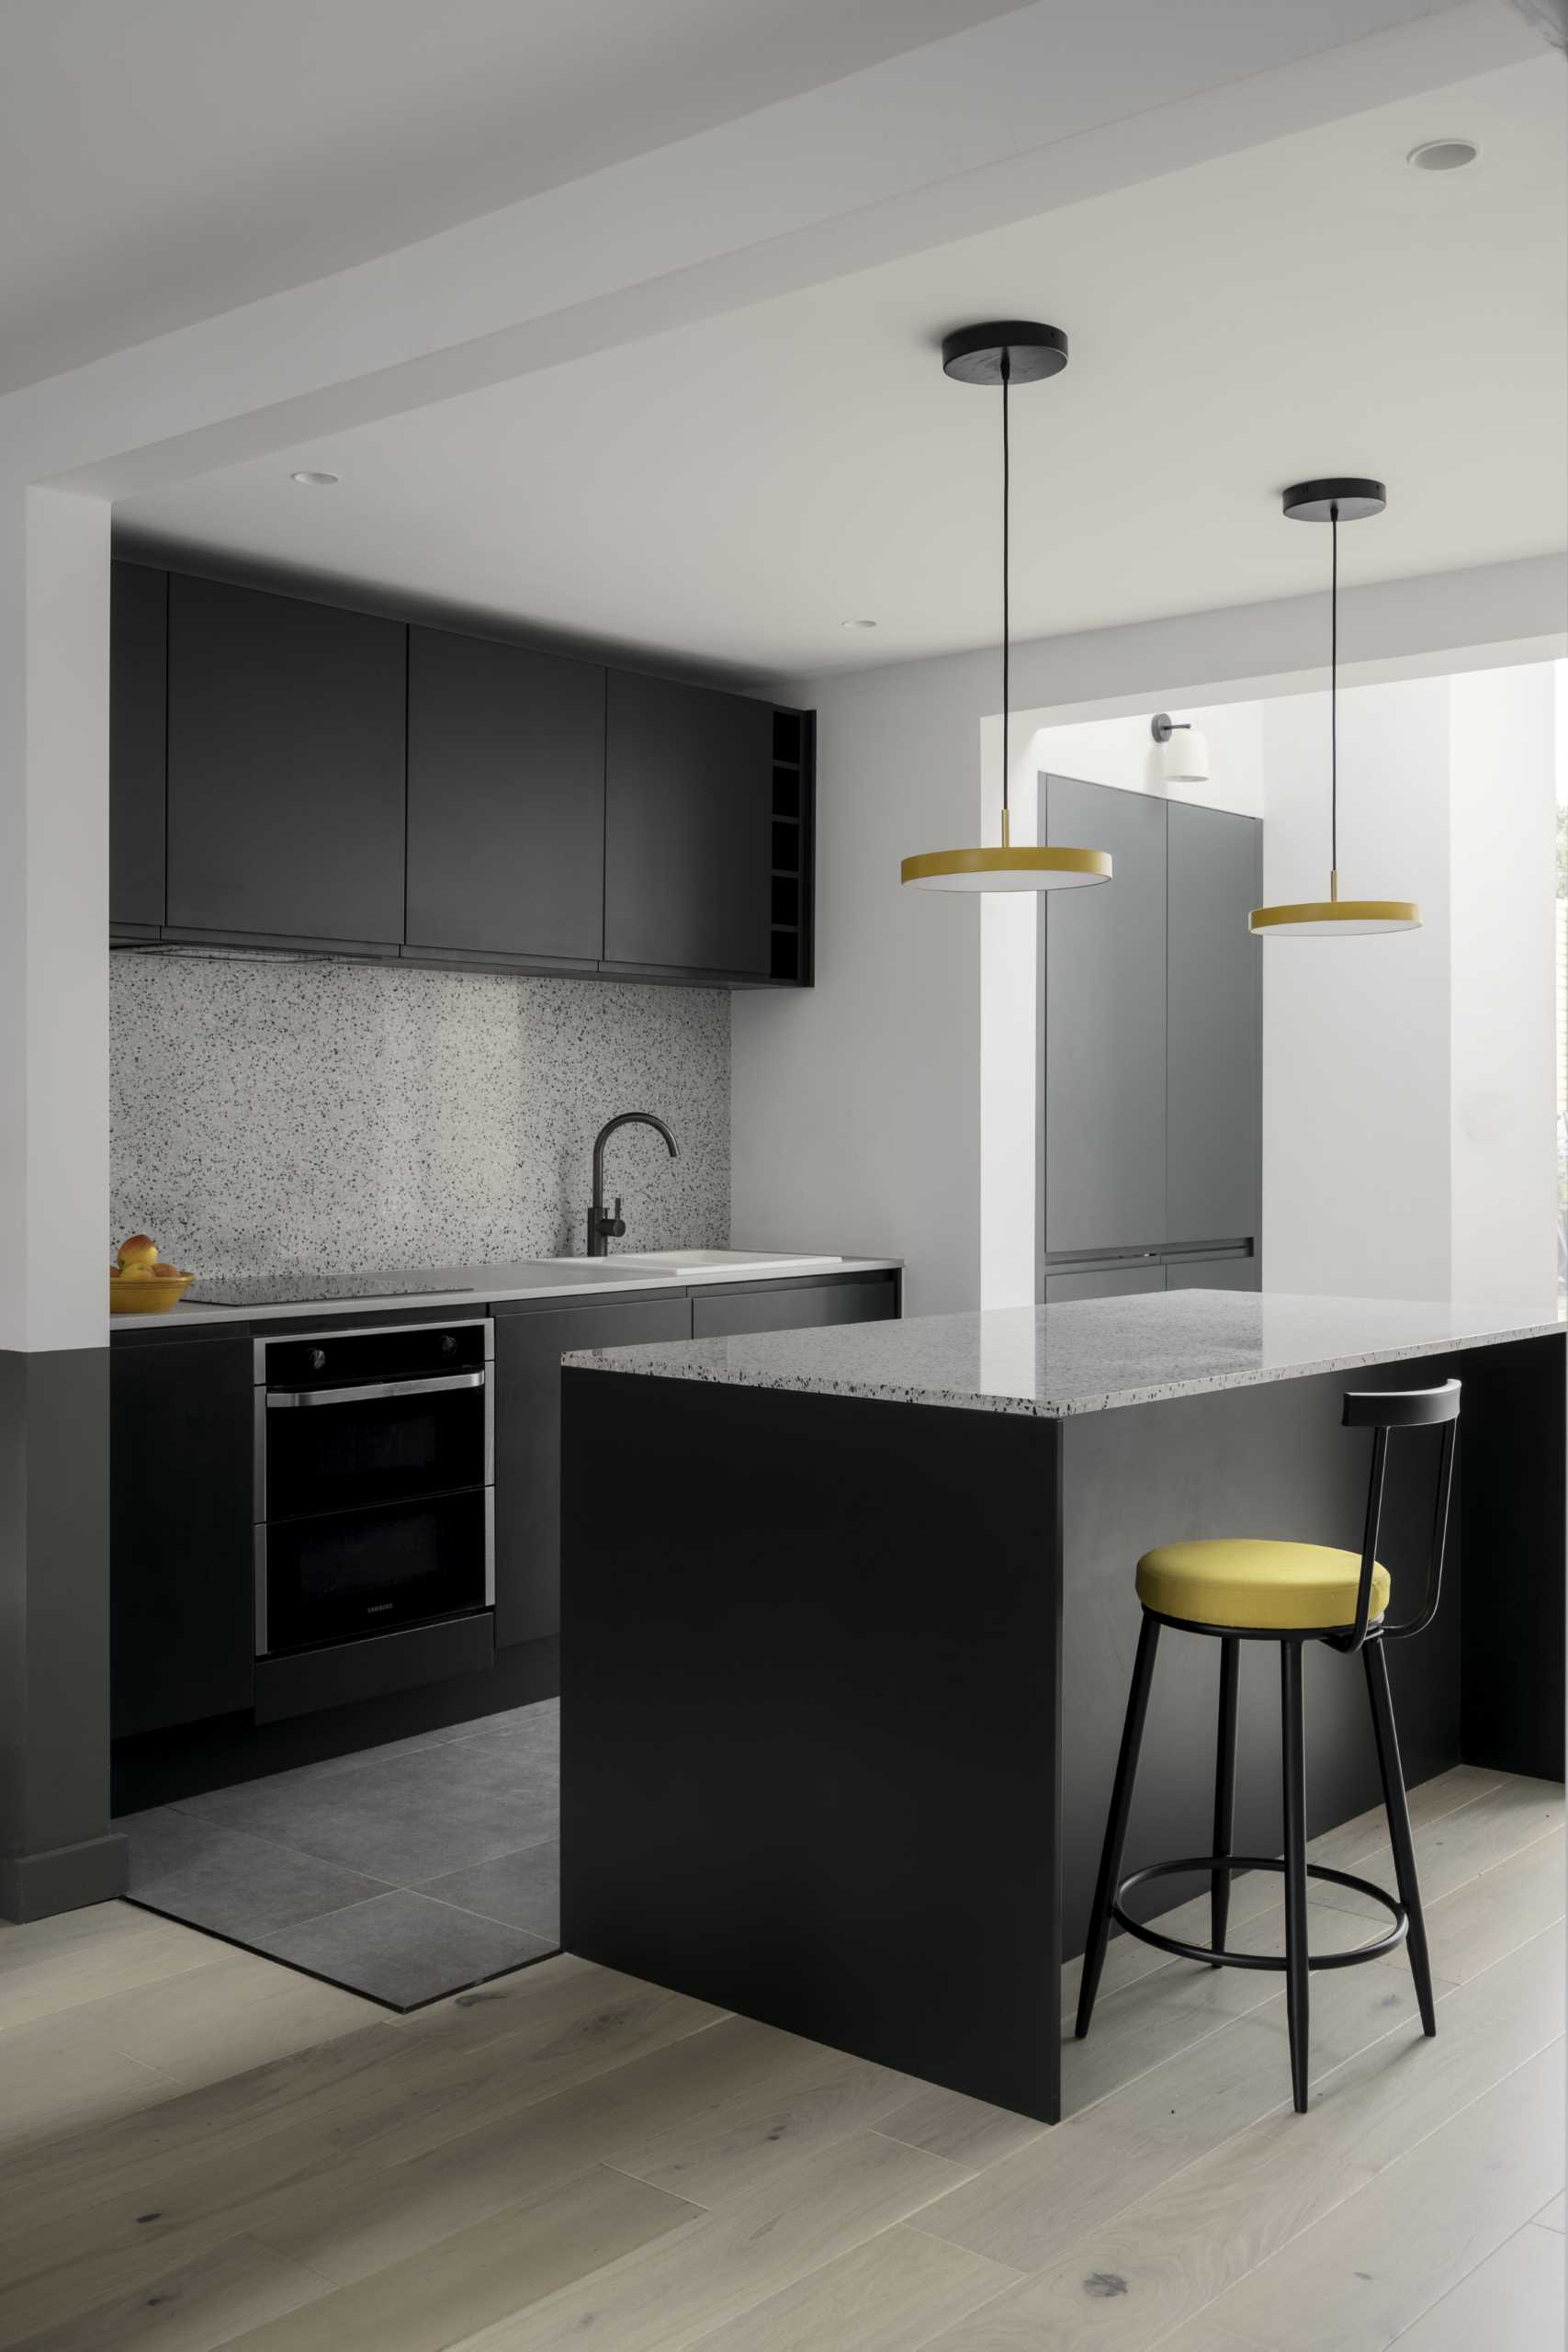 A kitchen with minimalist black cabinets and an island with seating. Yellow accents in the lights and chairs add a pop of color to the space.